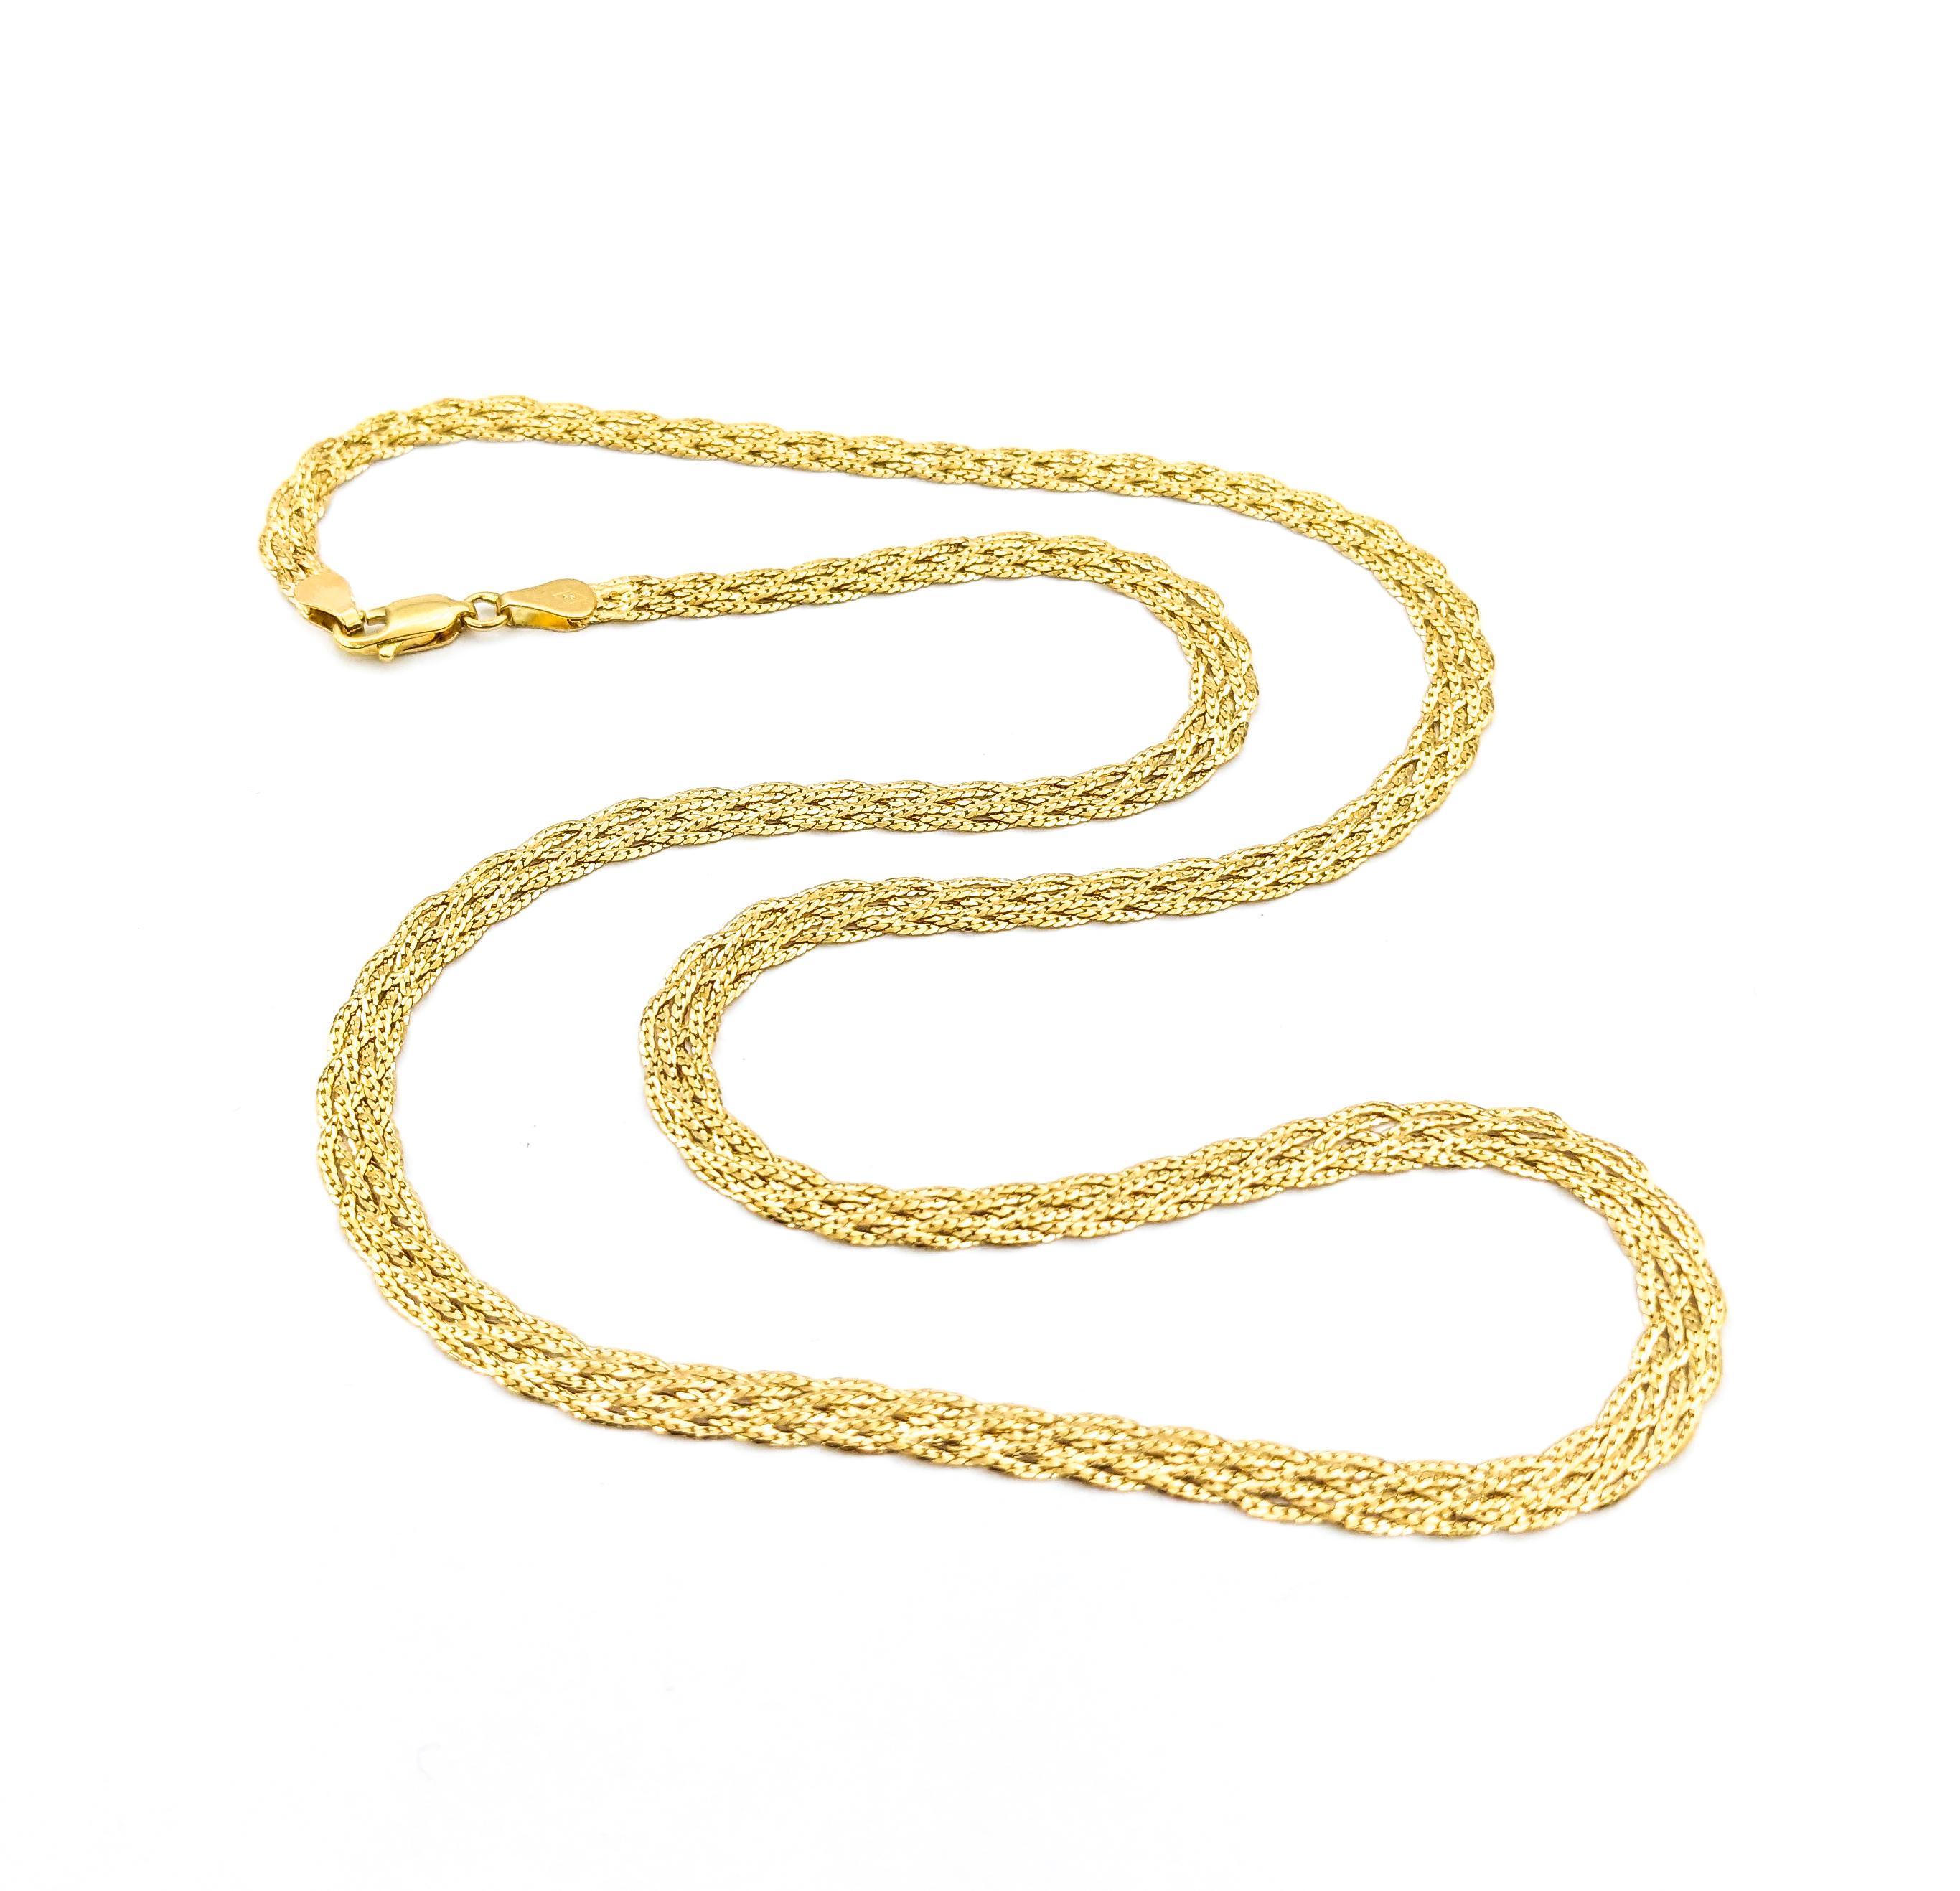 Woven Link Necklace In Yellow Gold


Discover the classic elegance of our Gold Fashion Necklace, crafted in lustrous 14kt yellow gold. This exquisite piece features a sophisticated woven link design, offering both style and durability. Measuring 21